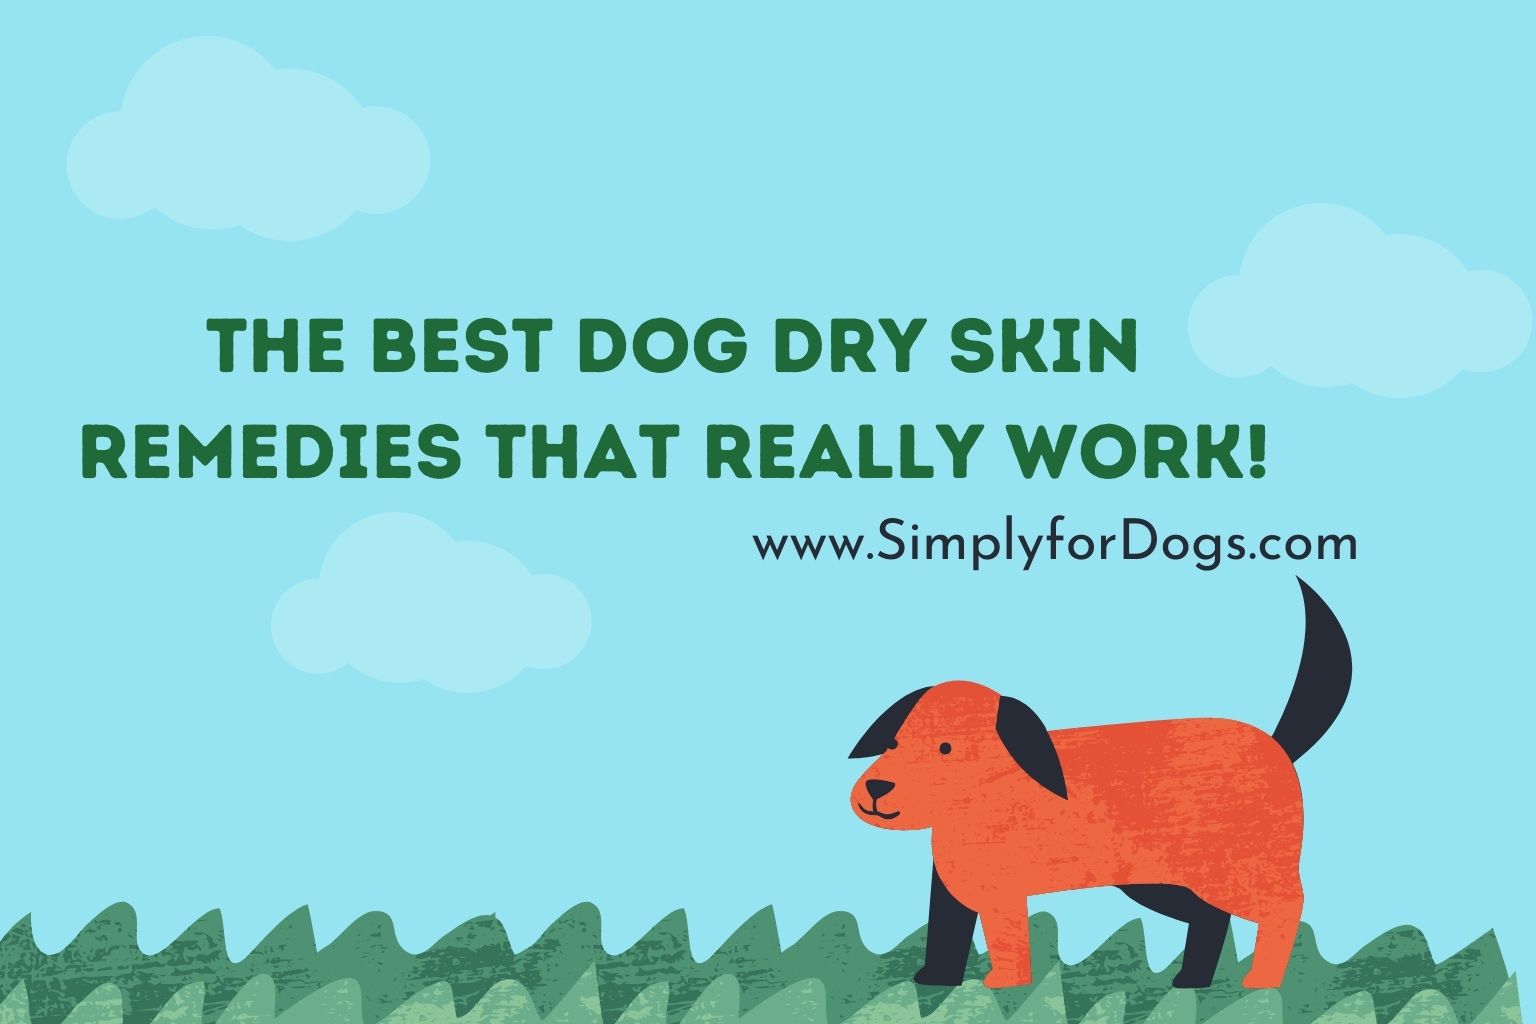 The Best Dog Dry Skin Remedies That Really Work!